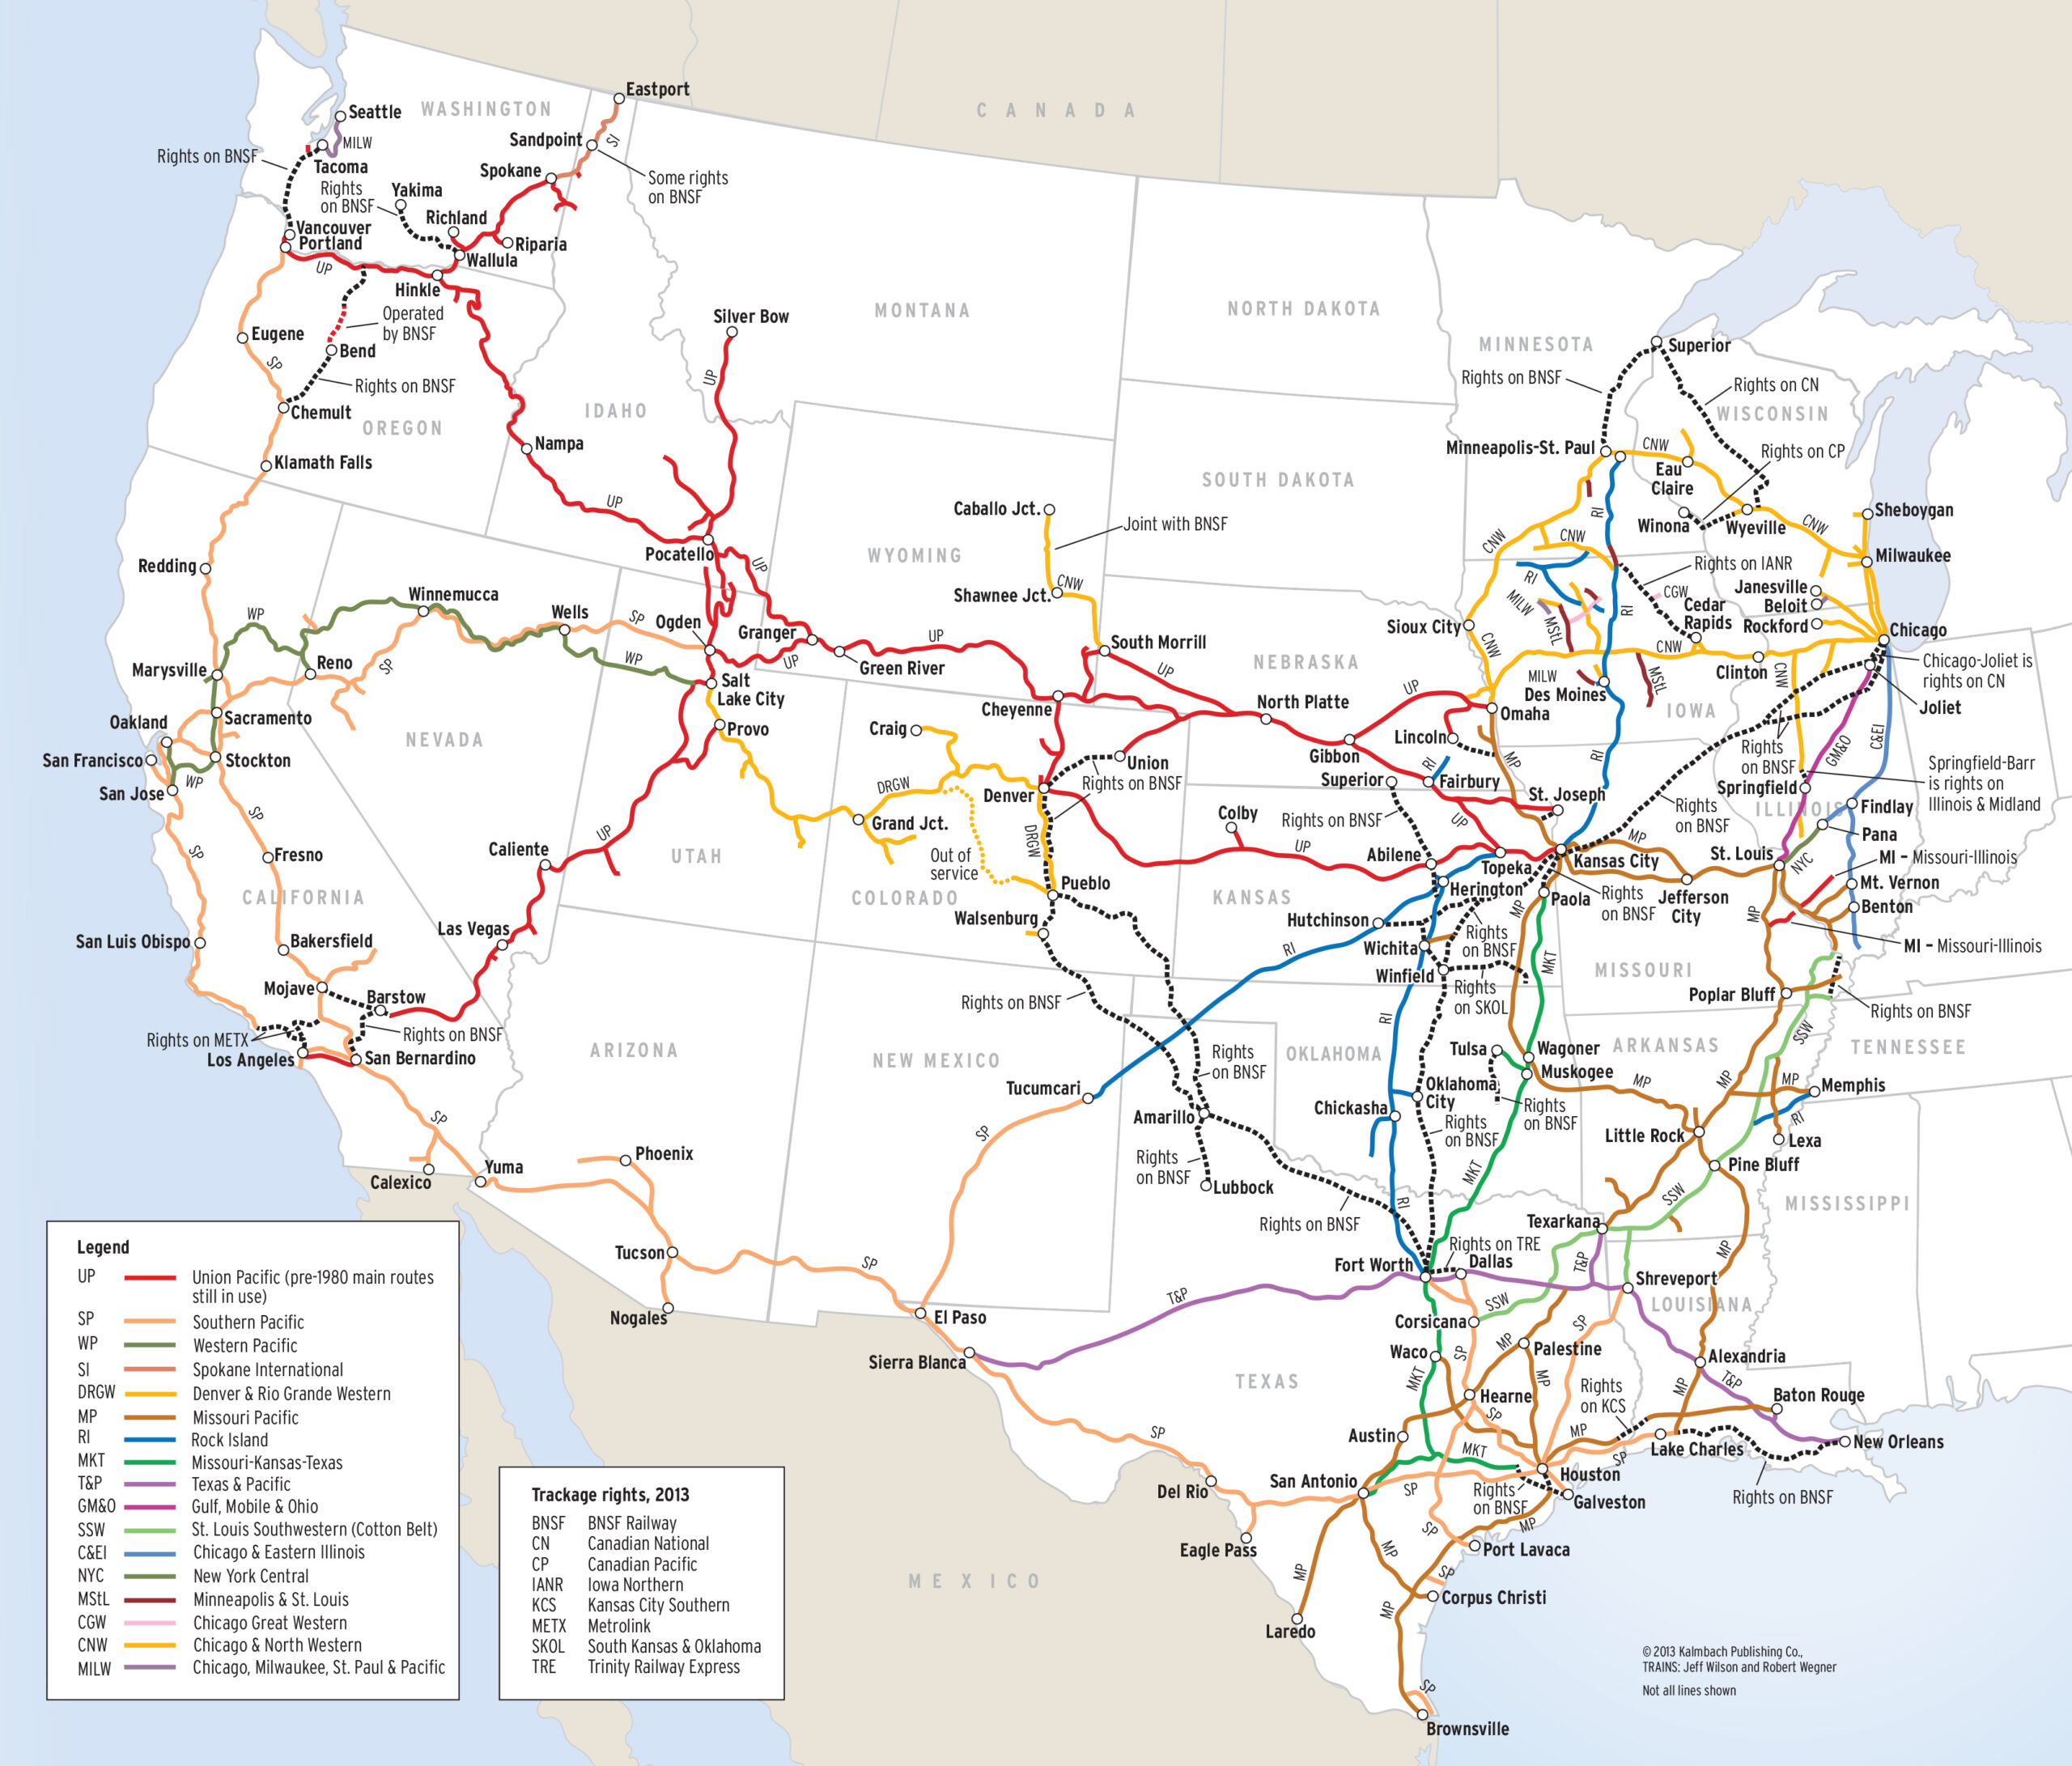 A map of the Union Pacific network from Trains magazine (2013). There are duplicate green and orange lines between San Francisco and Salt Lake City, and red and yellow lines between Salt Lake City and Denver. These routes comprise wholly redundant mainlines, of which Union Pacific focuses most of its traffic on the red and orange lines, respectively.